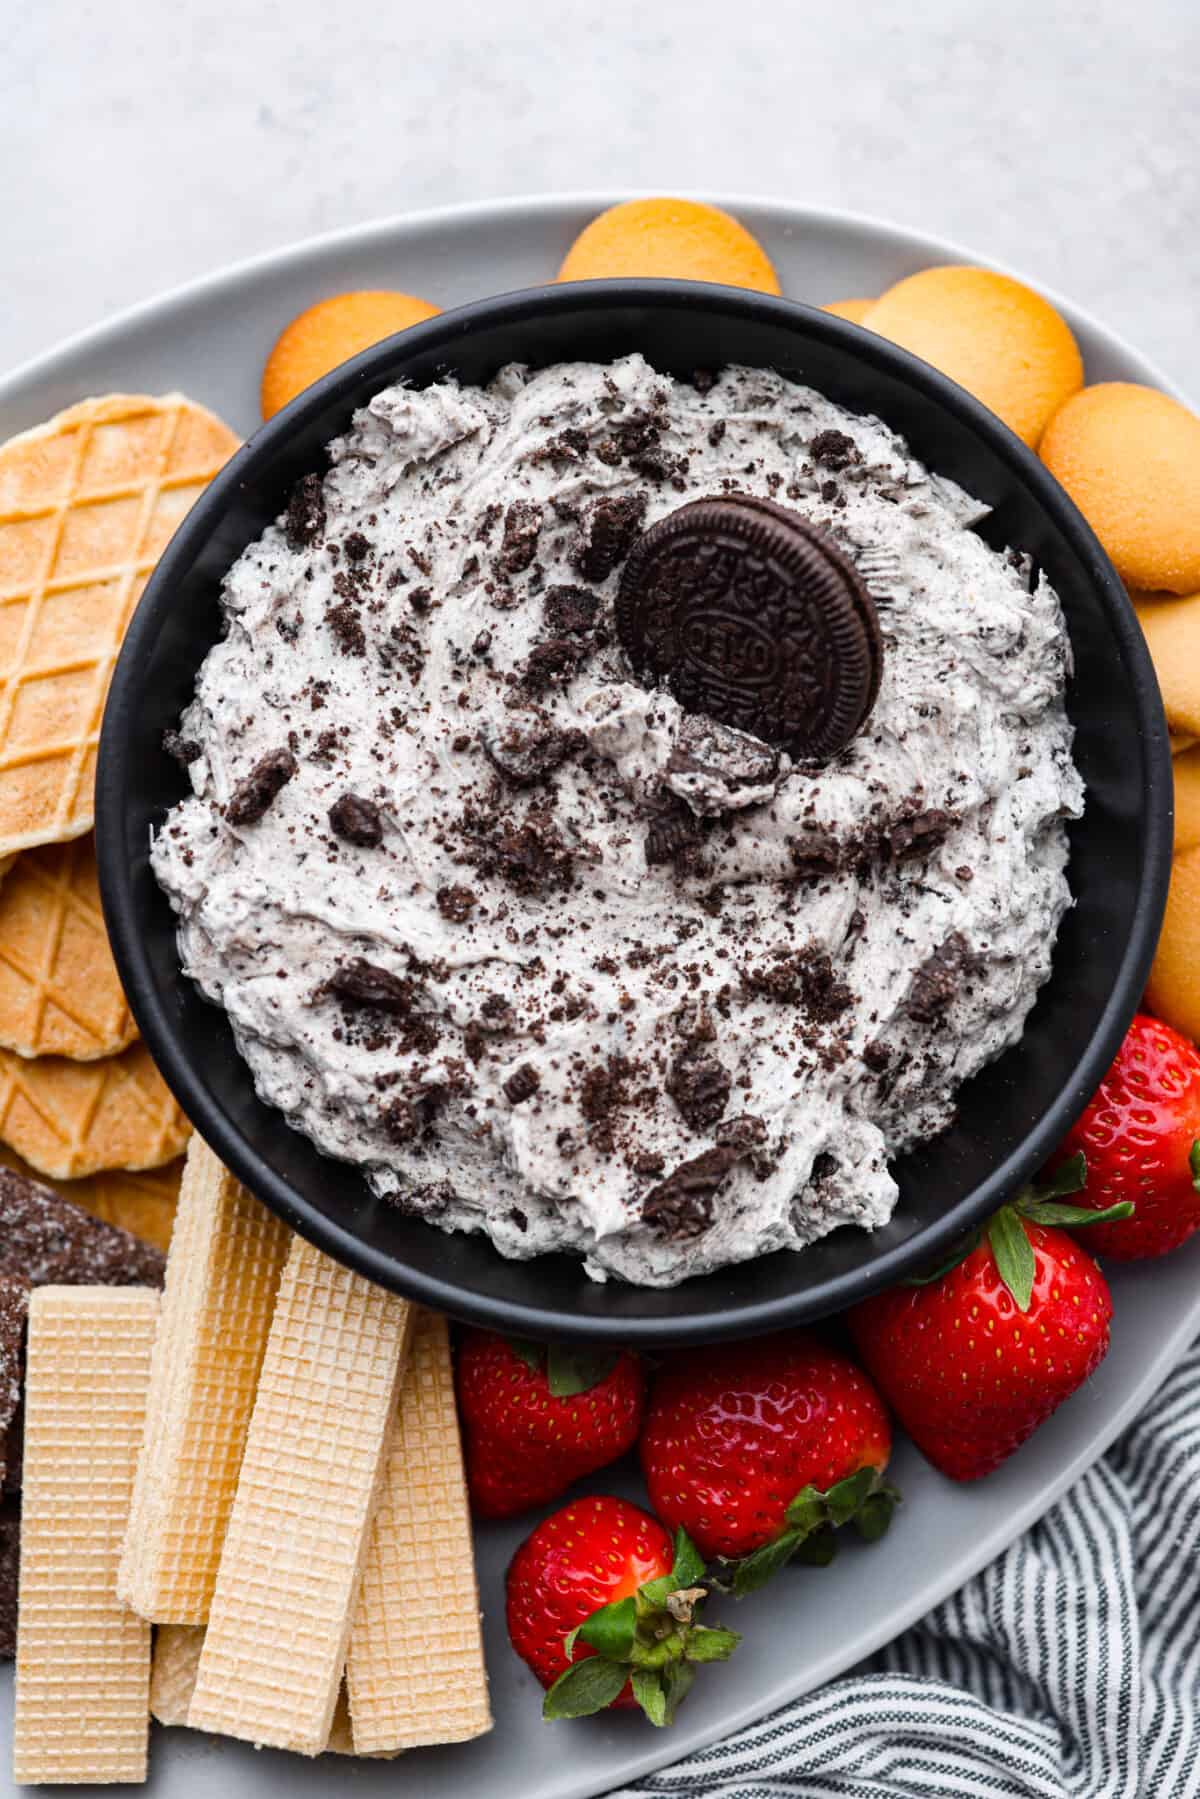 A bowl of oreo dip surrounded by cookies, wafers, and strawberries.